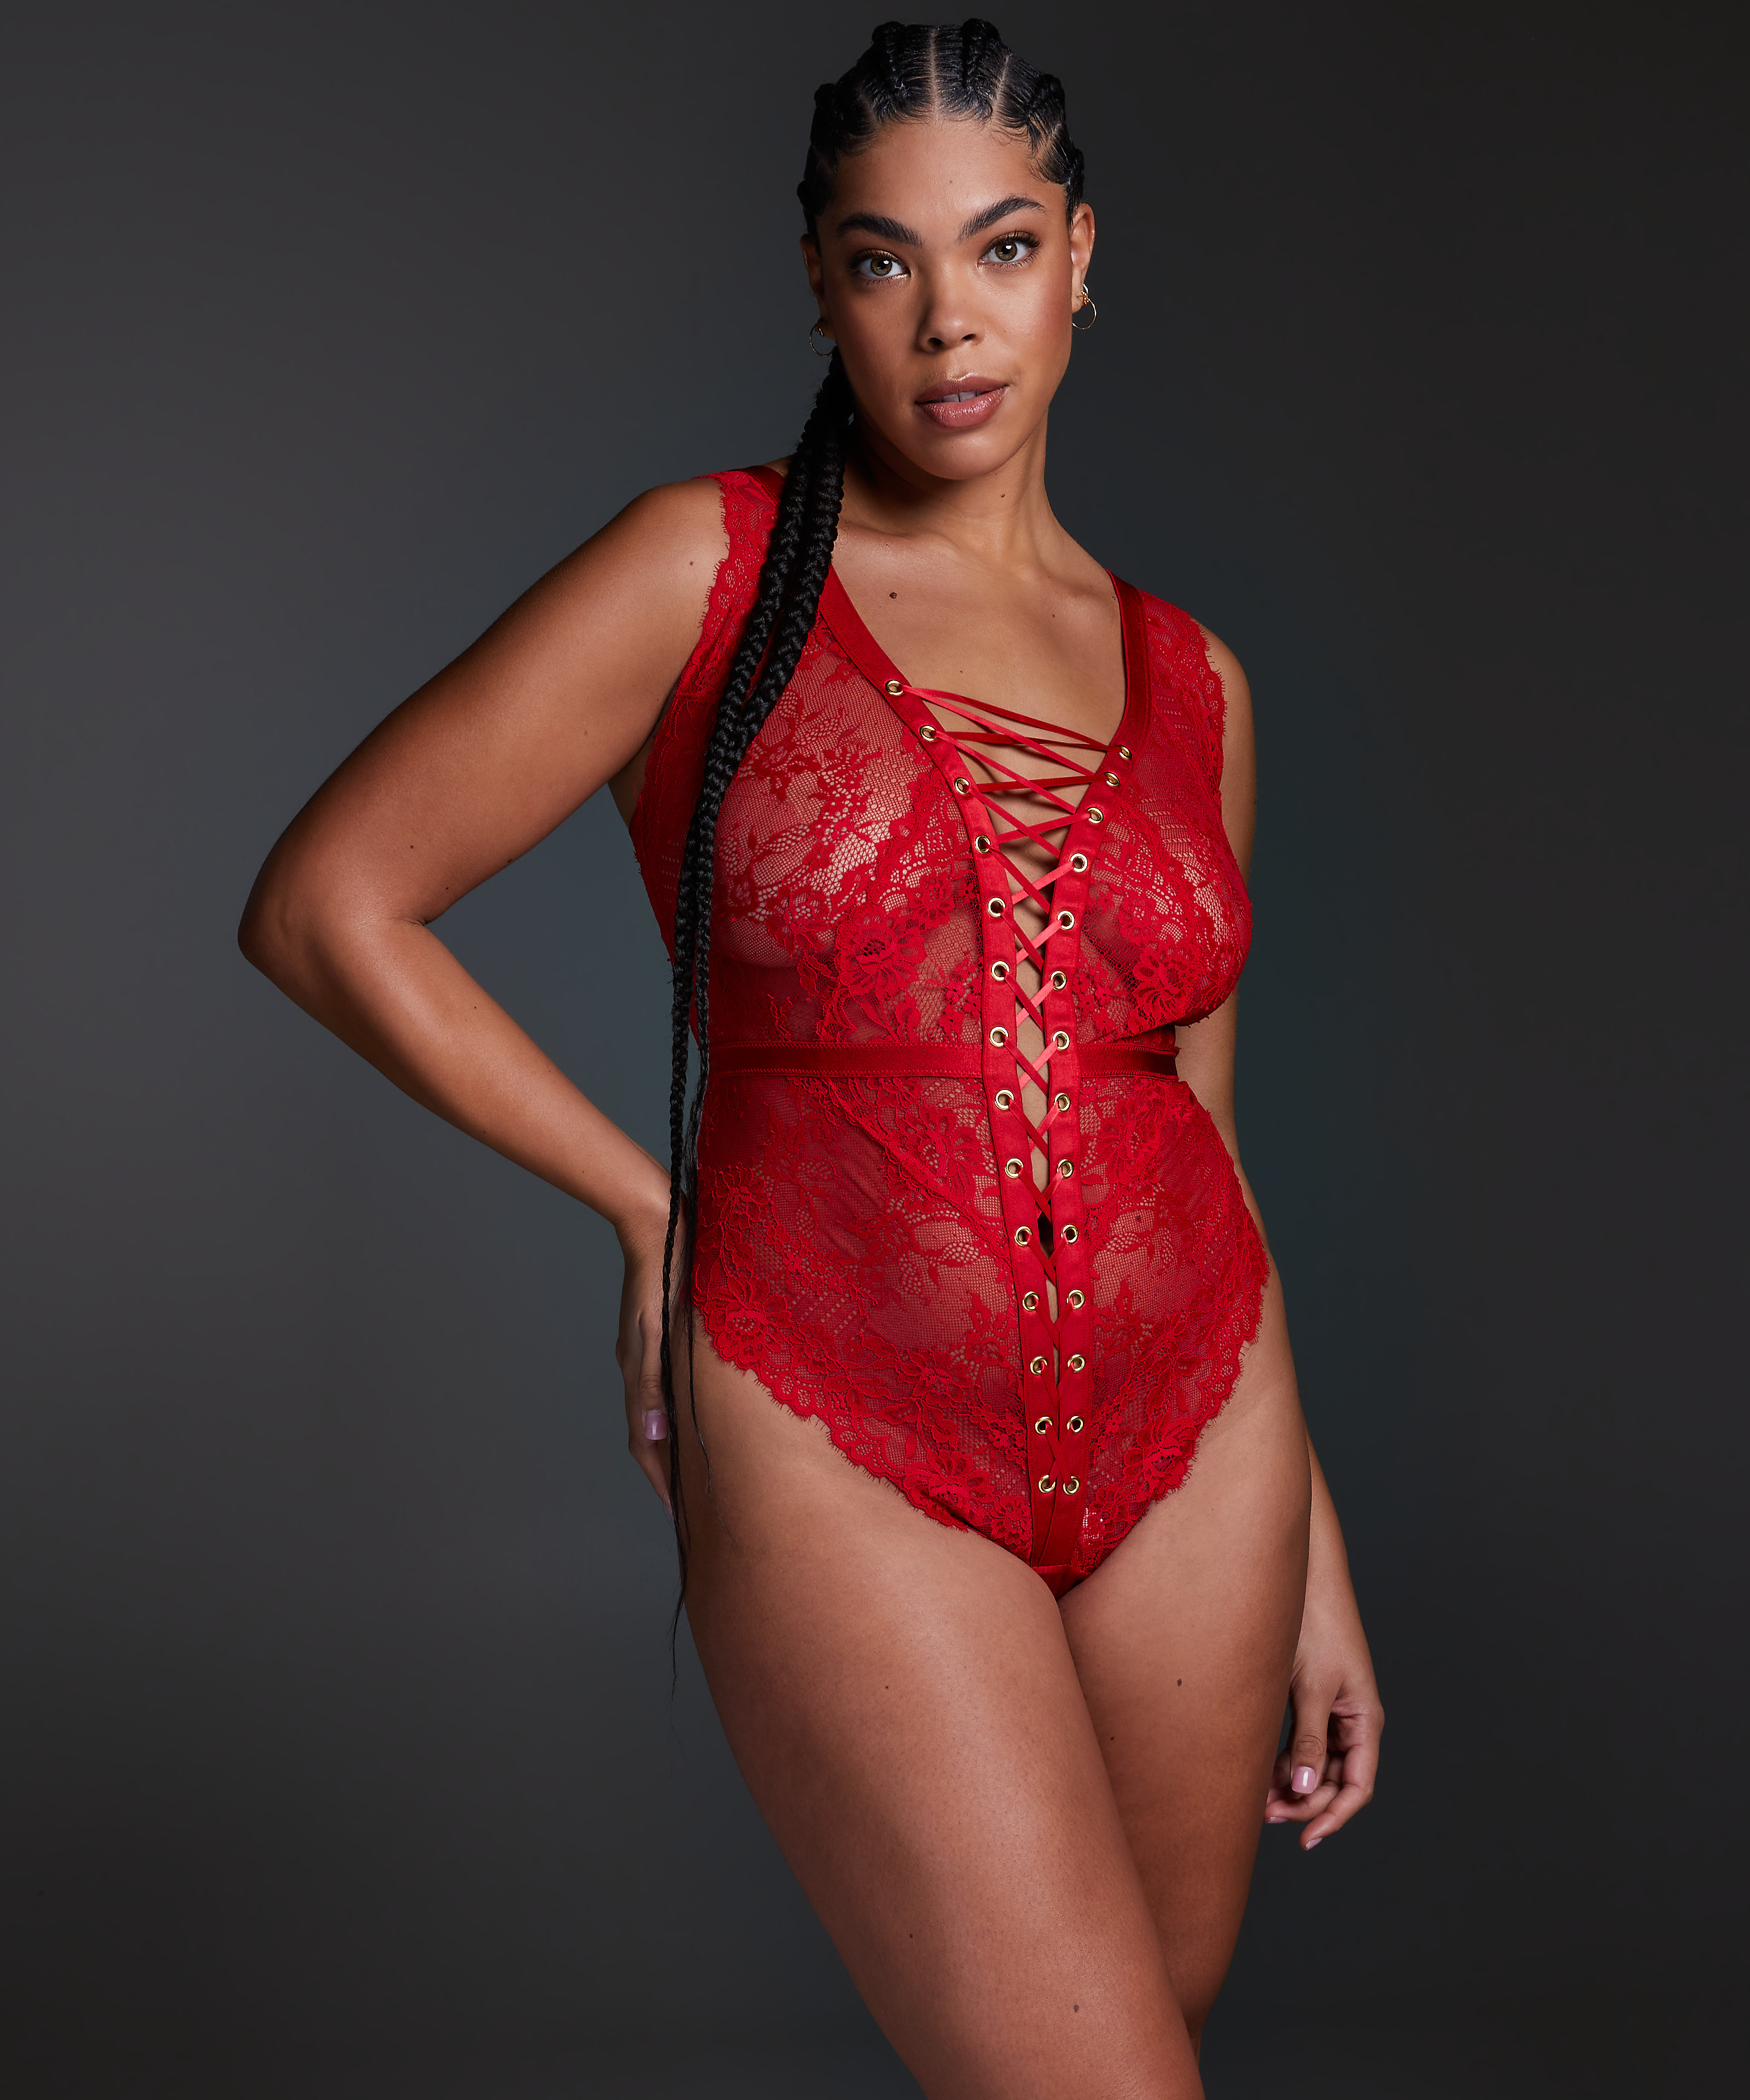 Private Taylor Body Curvy, Red, main